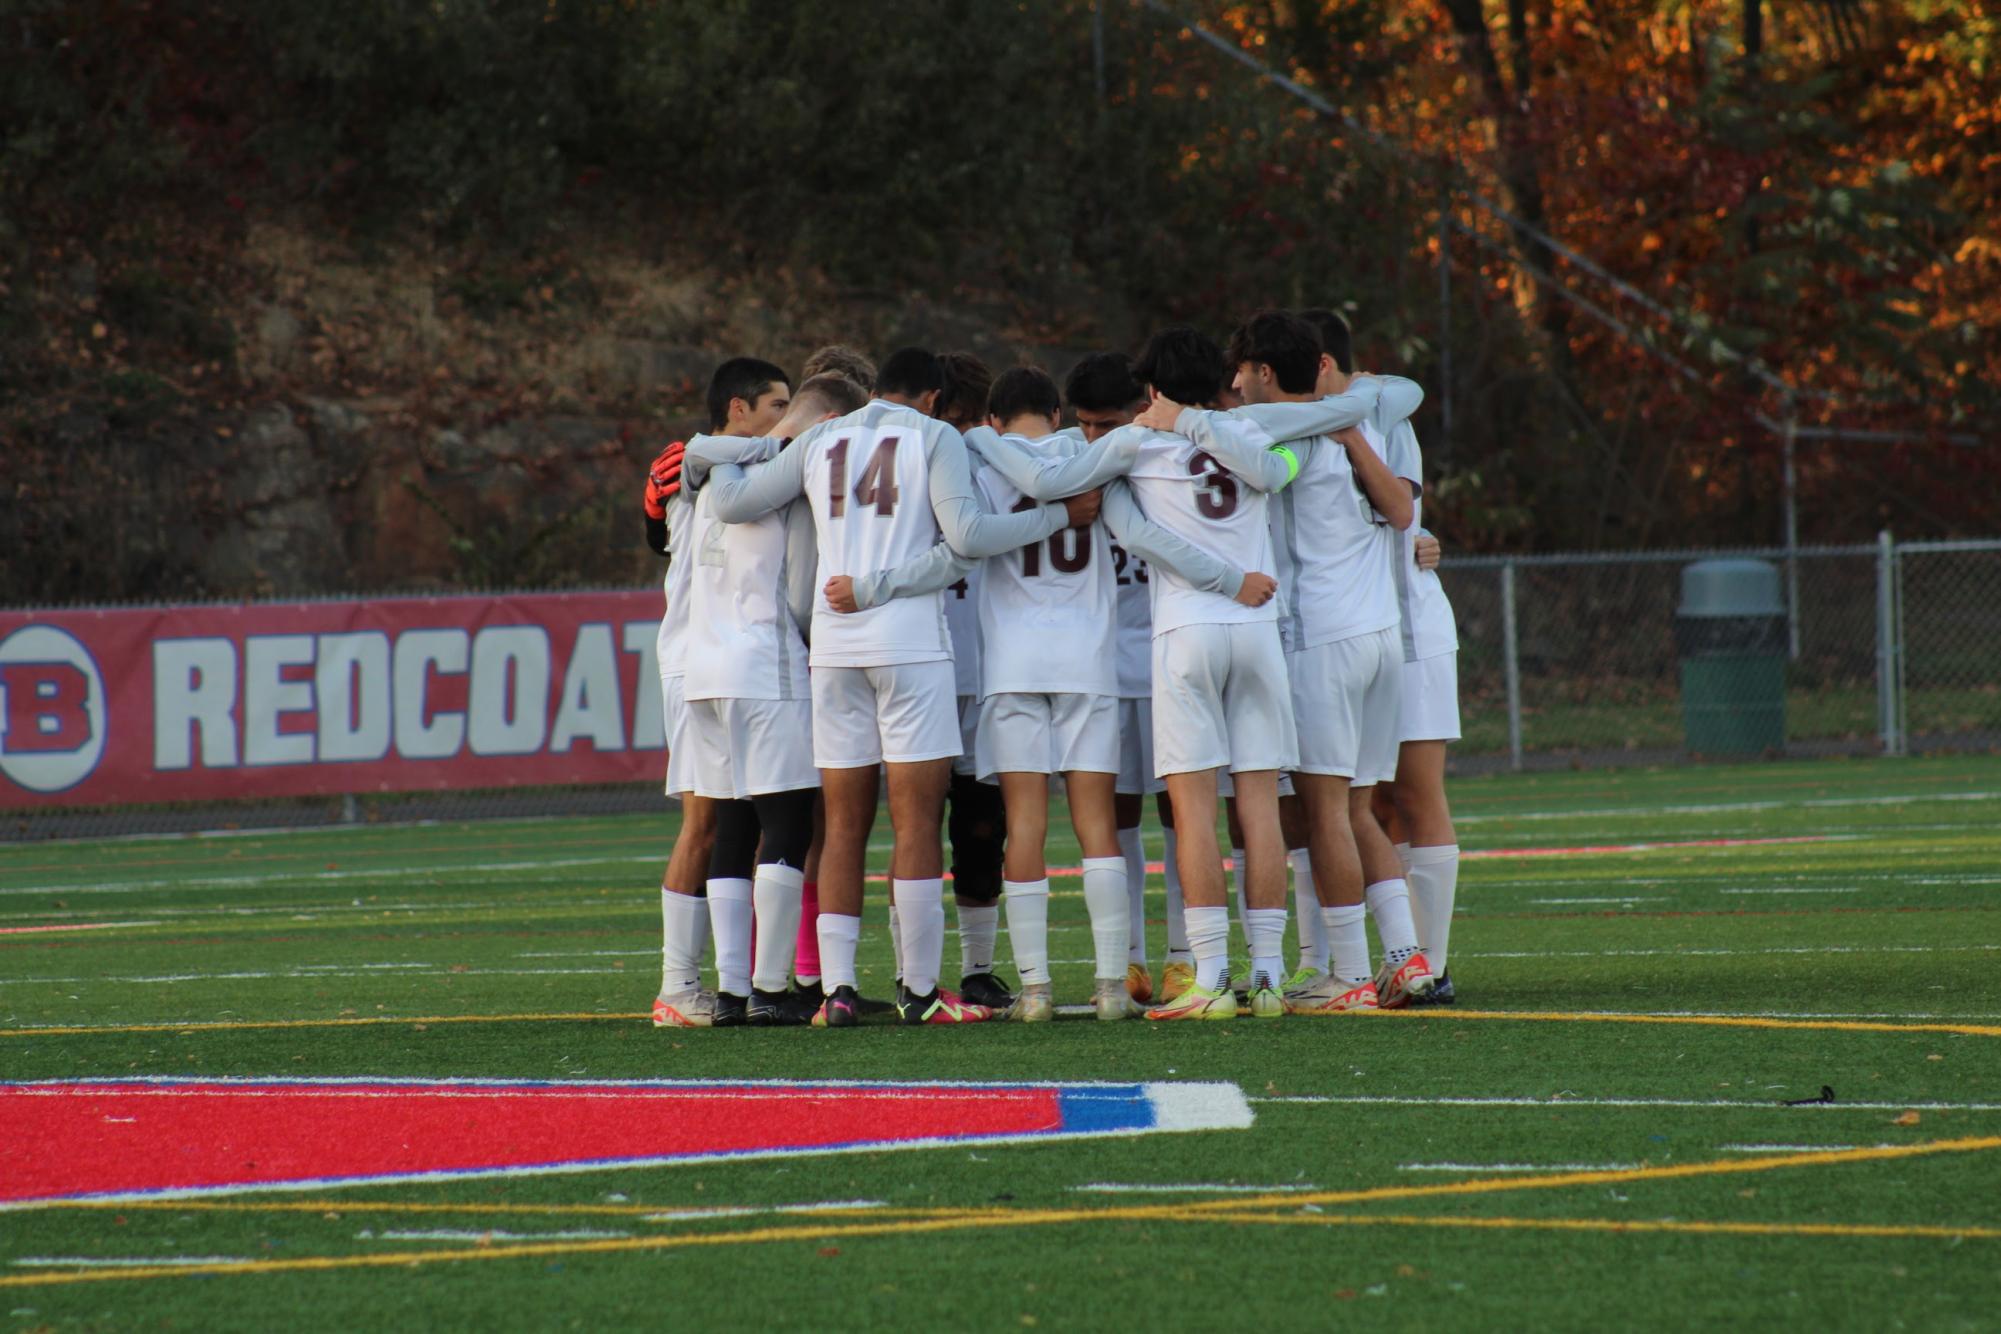 Boys soccer season ends with the team making it to the final in the CCC tournament.  Pictured team huddled during the Glastonbury game.